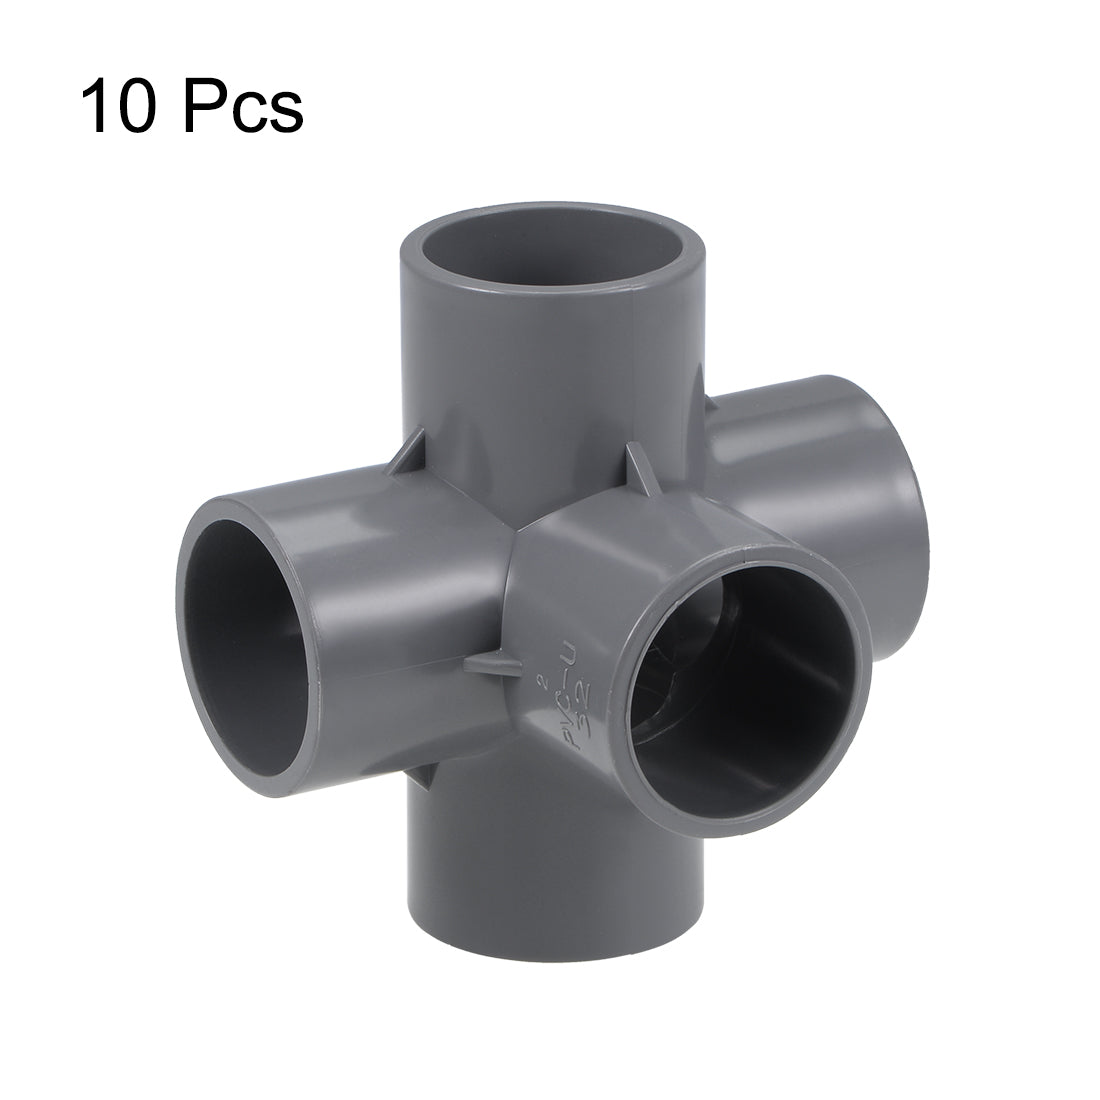 uxcell Uxcell 5 Way 32mm Tee Metric PVC Fitting Elbow - PVC Furniture Elbow Fittings Gray 10Pcs